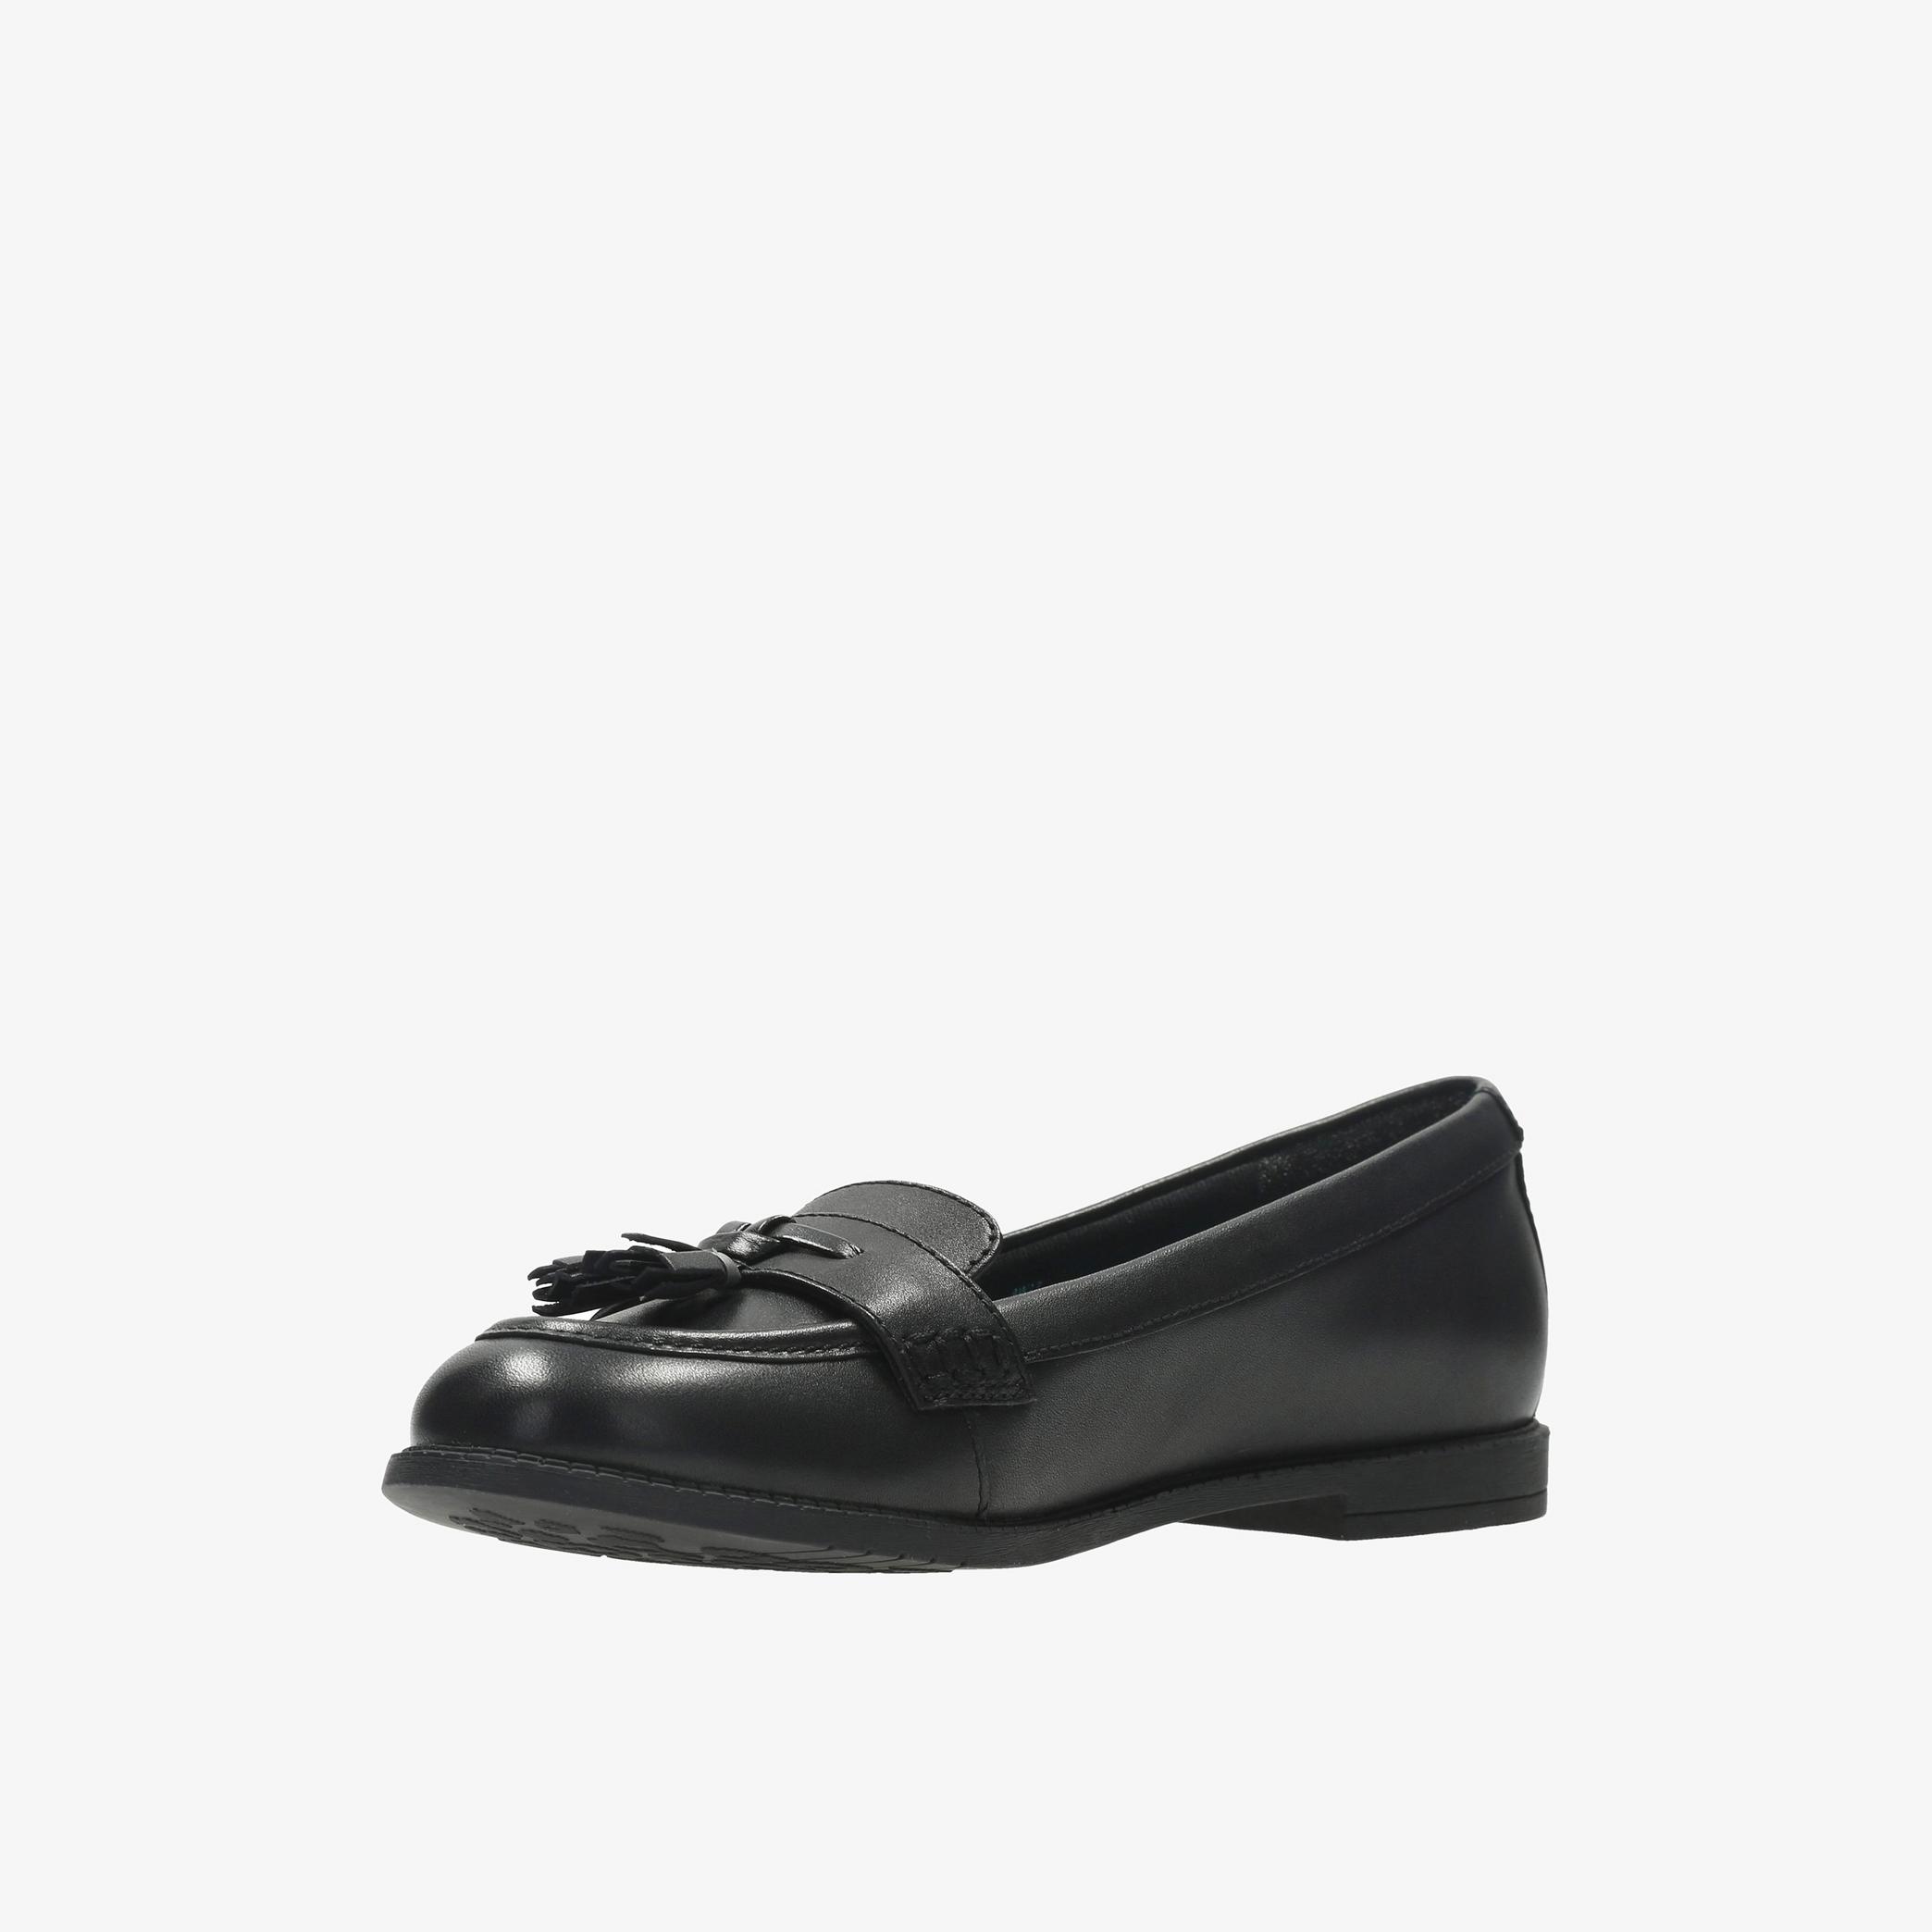 Preppy Edge Youth Black Leather Loafers, view 4 of 6